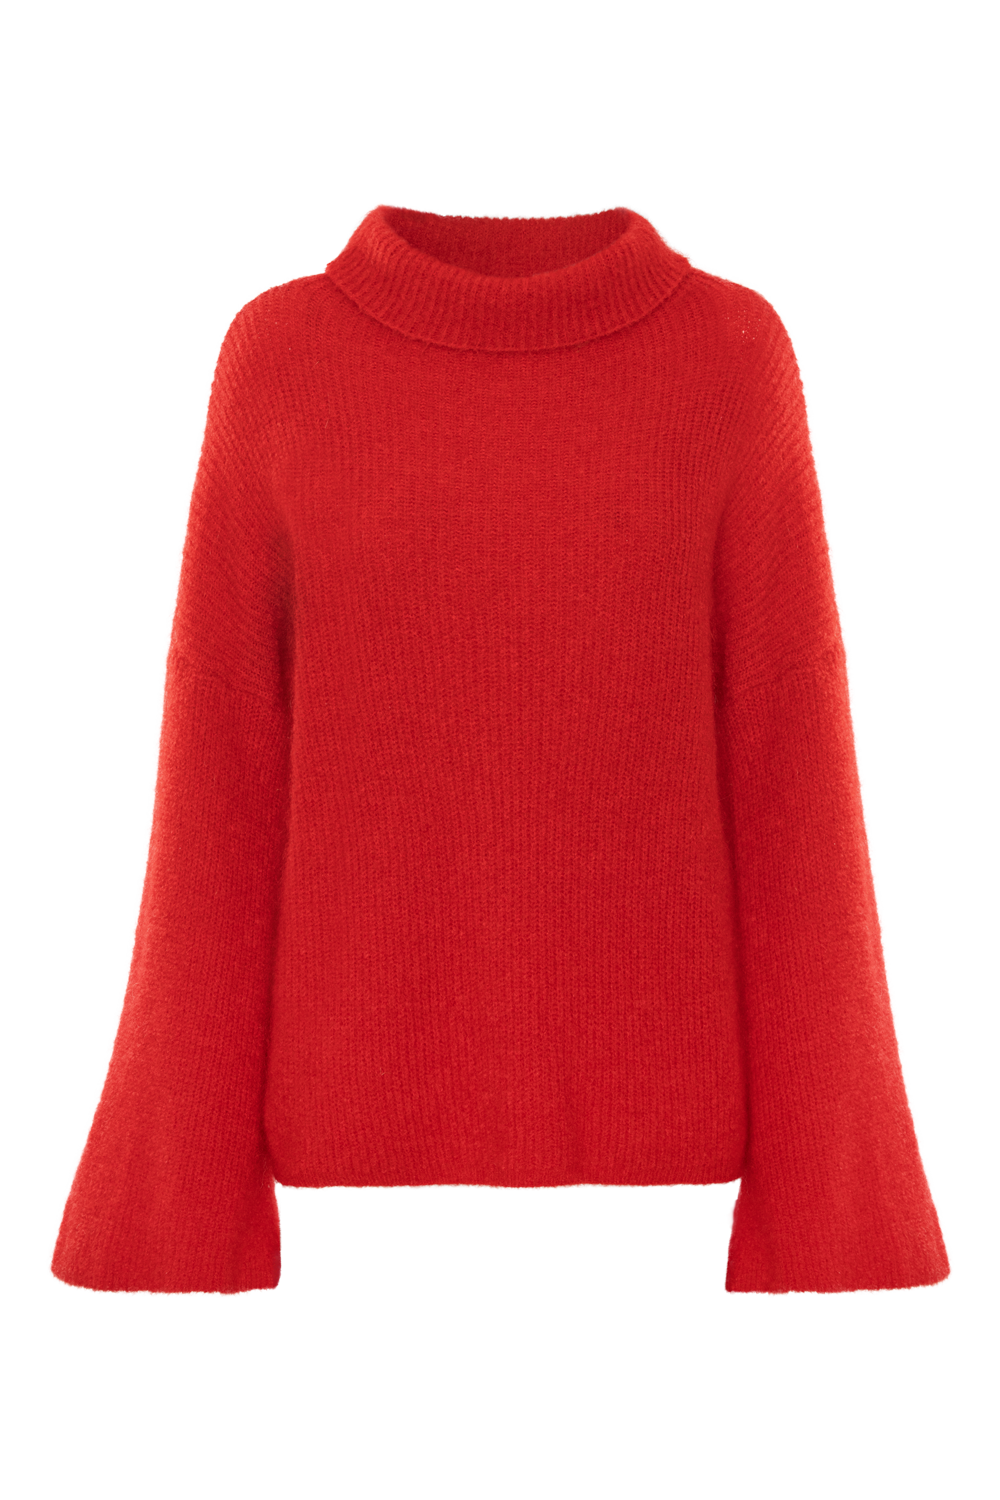 Felicia Oversized Knit Lipstick Red